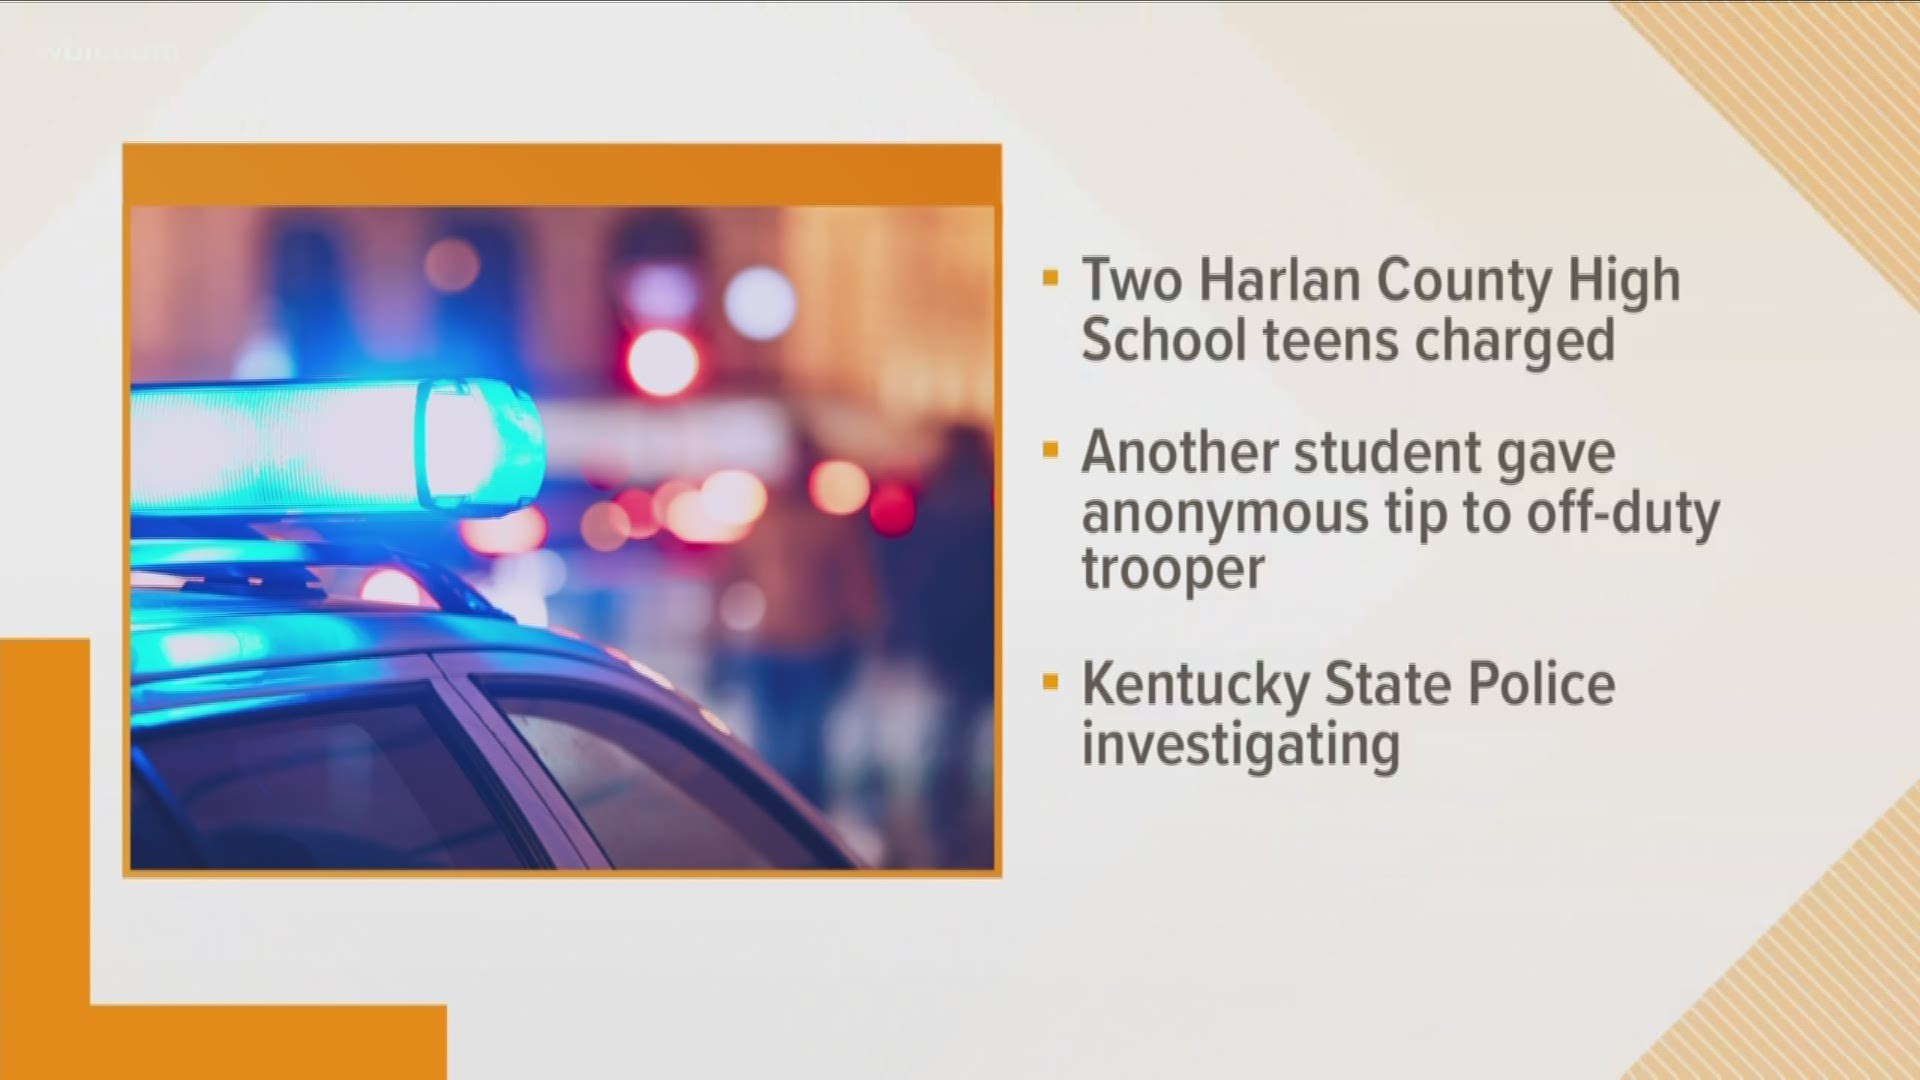 Two teens in Harlan County, Kentucky, are facing terrorism charges after police say they made threats toward their high school: Harlan County High.